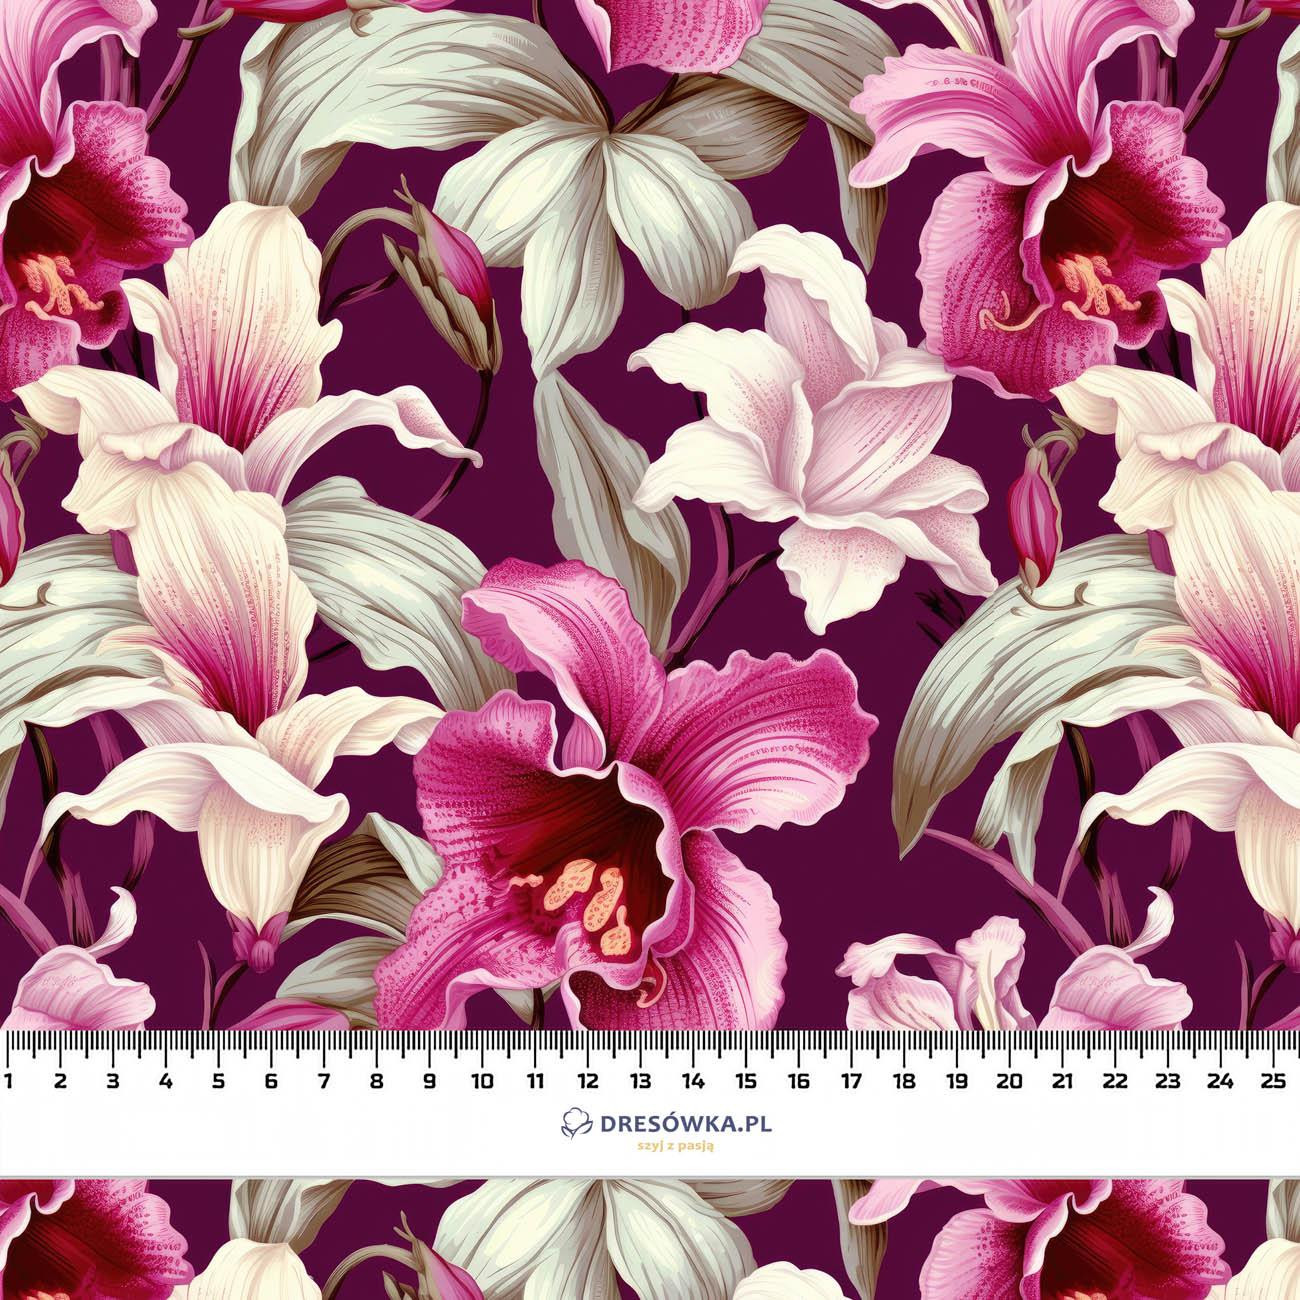 EXOTIC ORCHIDS MS. 8 - Softshell 